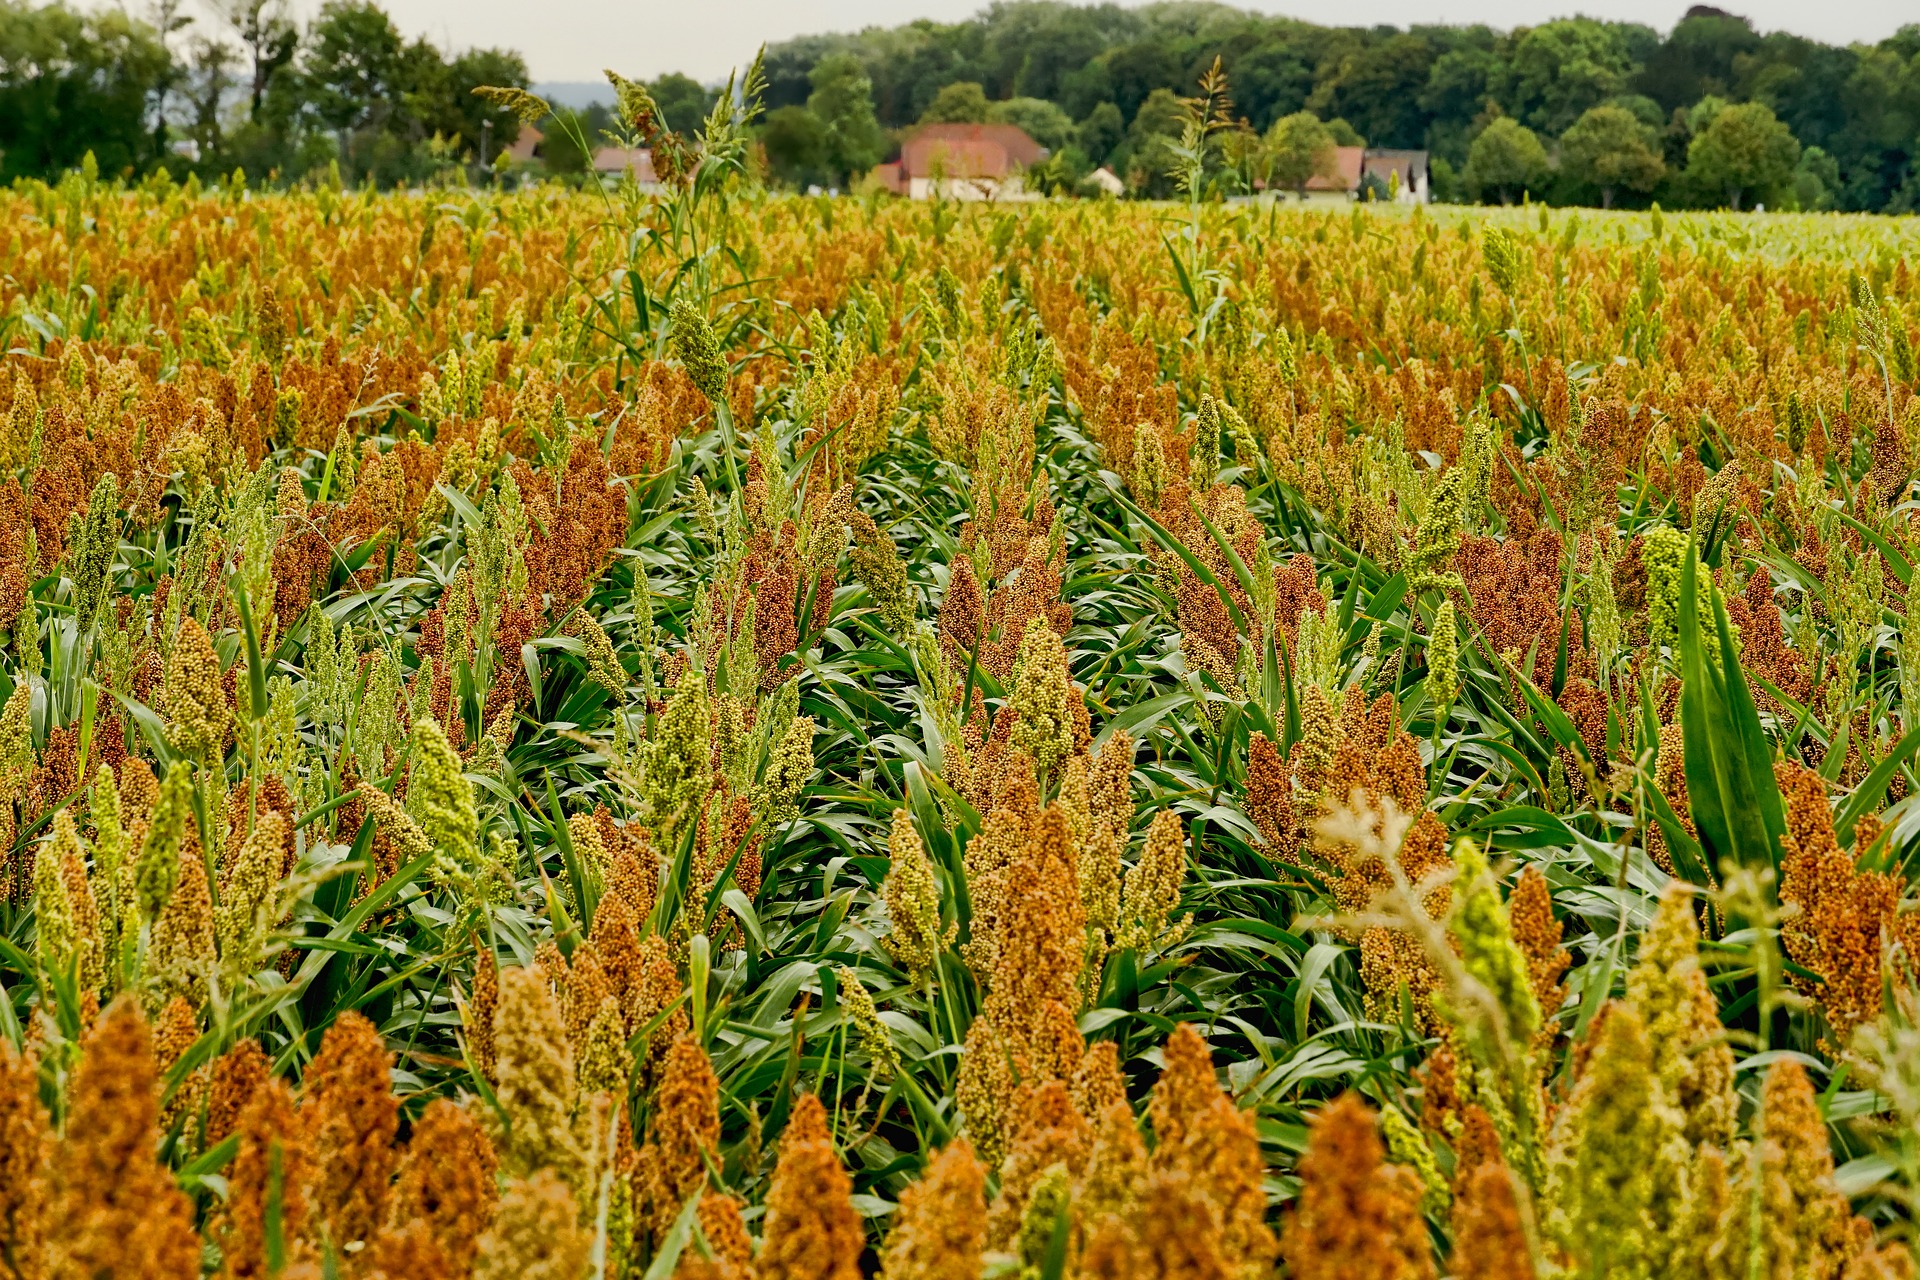 Public domain image of a field of sorghum. 